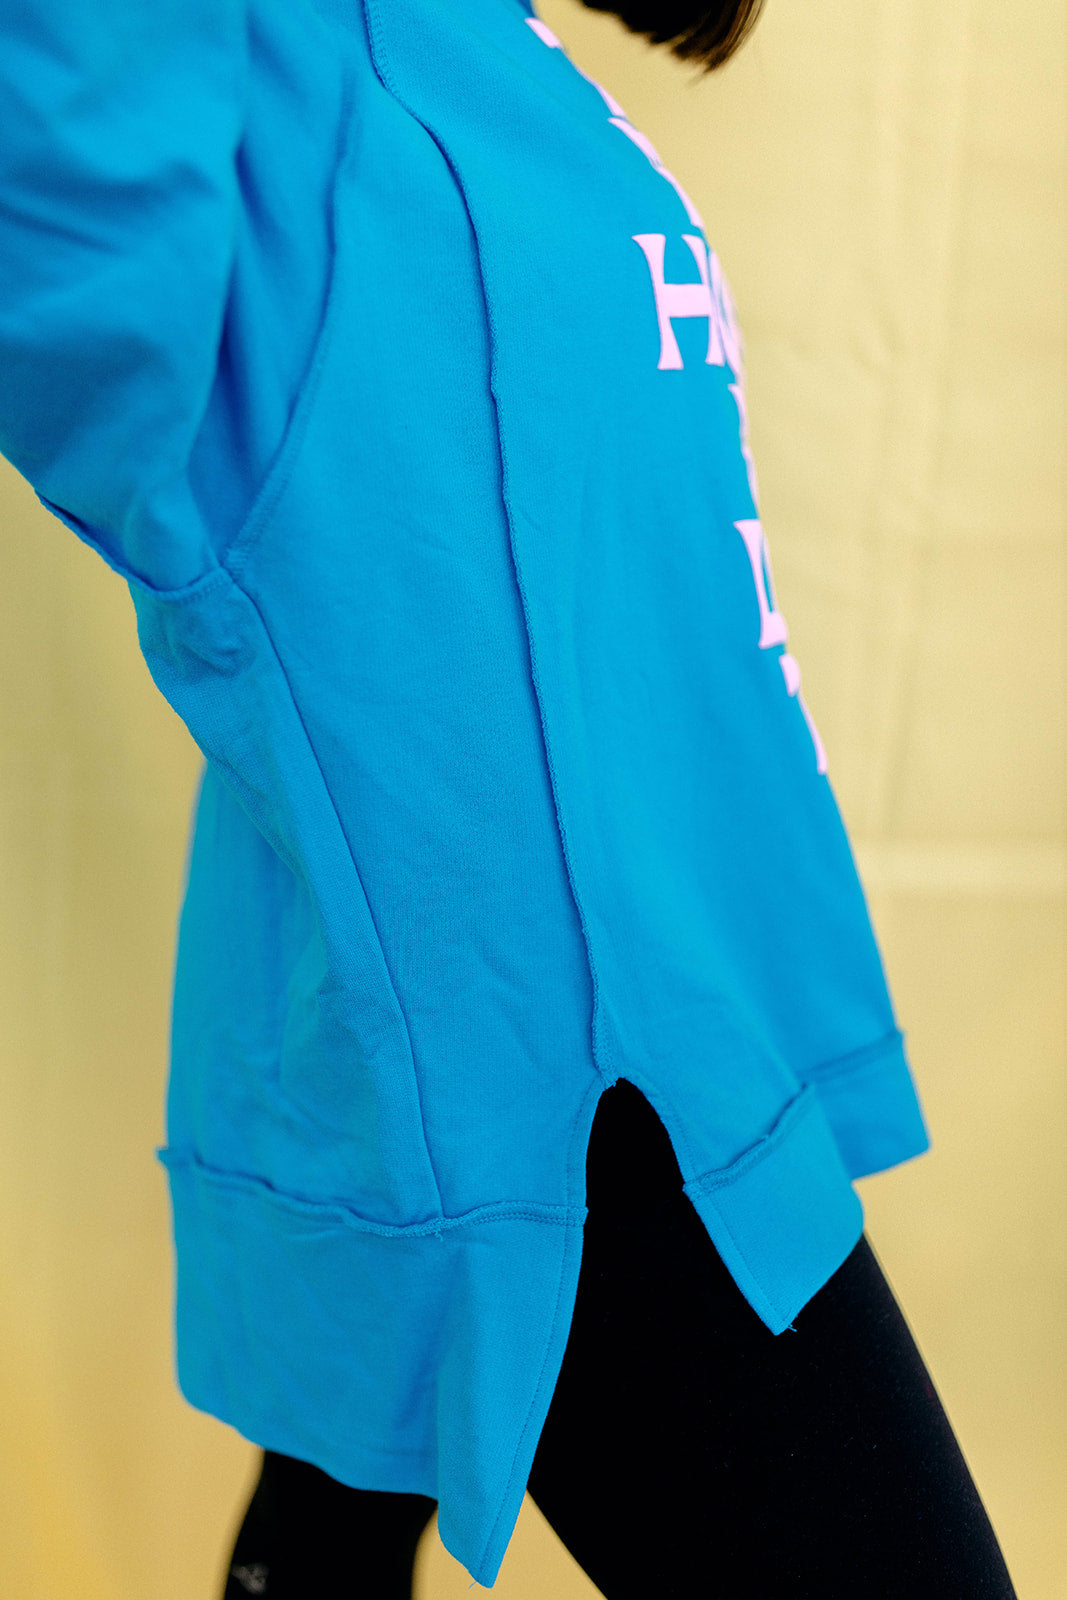 TABY ORIGINAL: Tell Your Homies You Love Them PULLOVER*** EXTREME PUFF***  IN SKY BLUE***